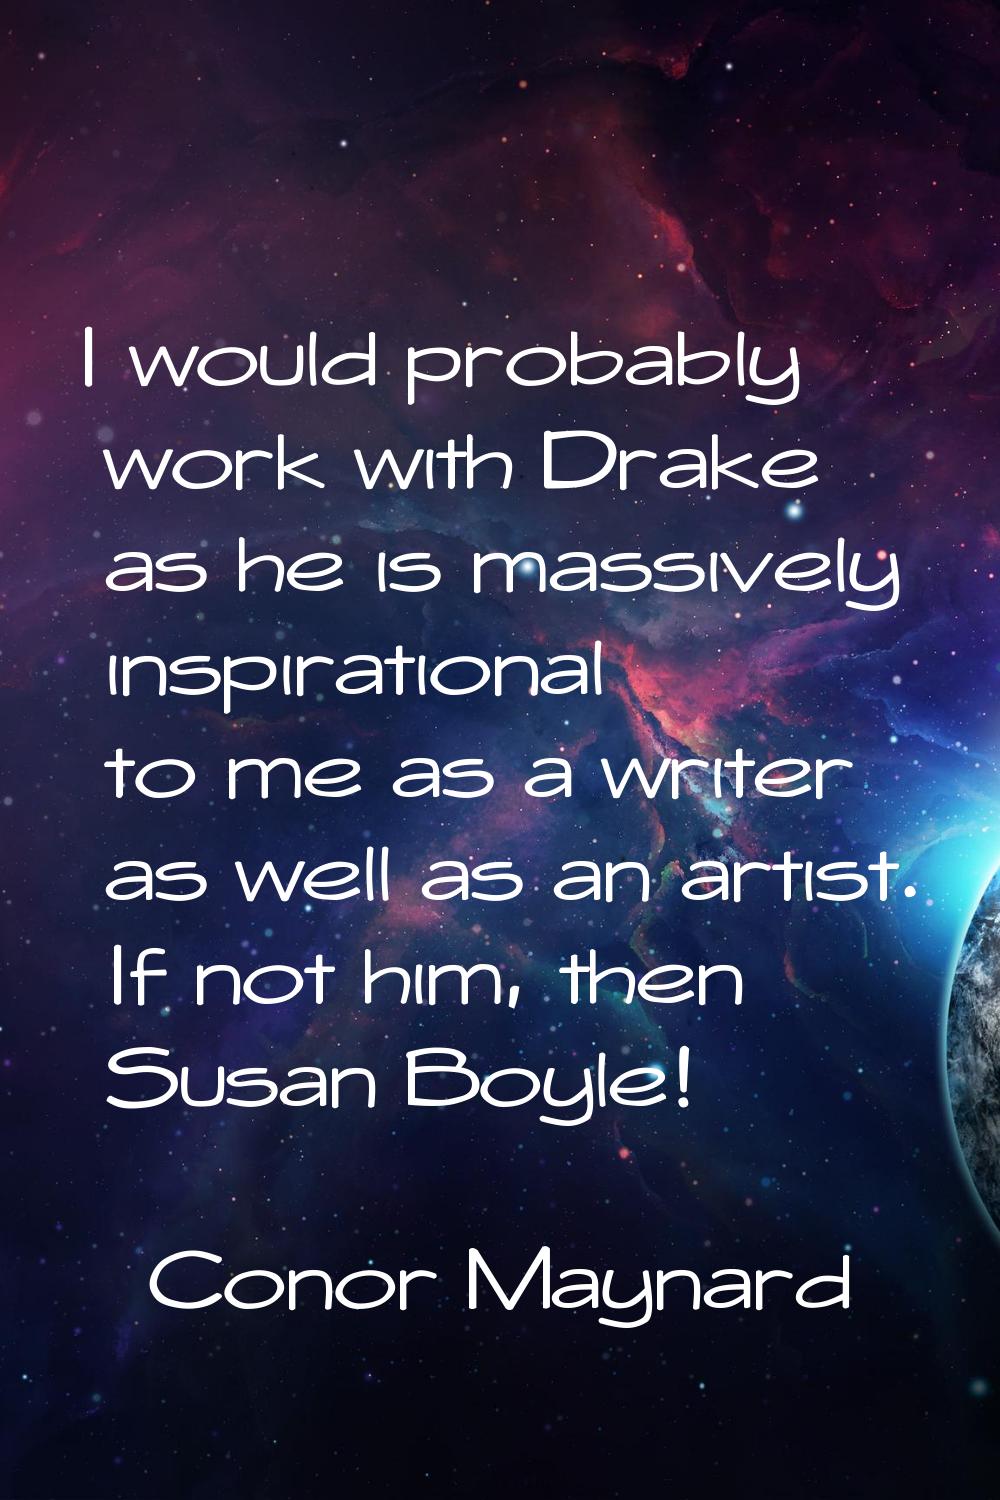 I would probably work with Drake as he is massively inspirational to me as a writer as well as an a